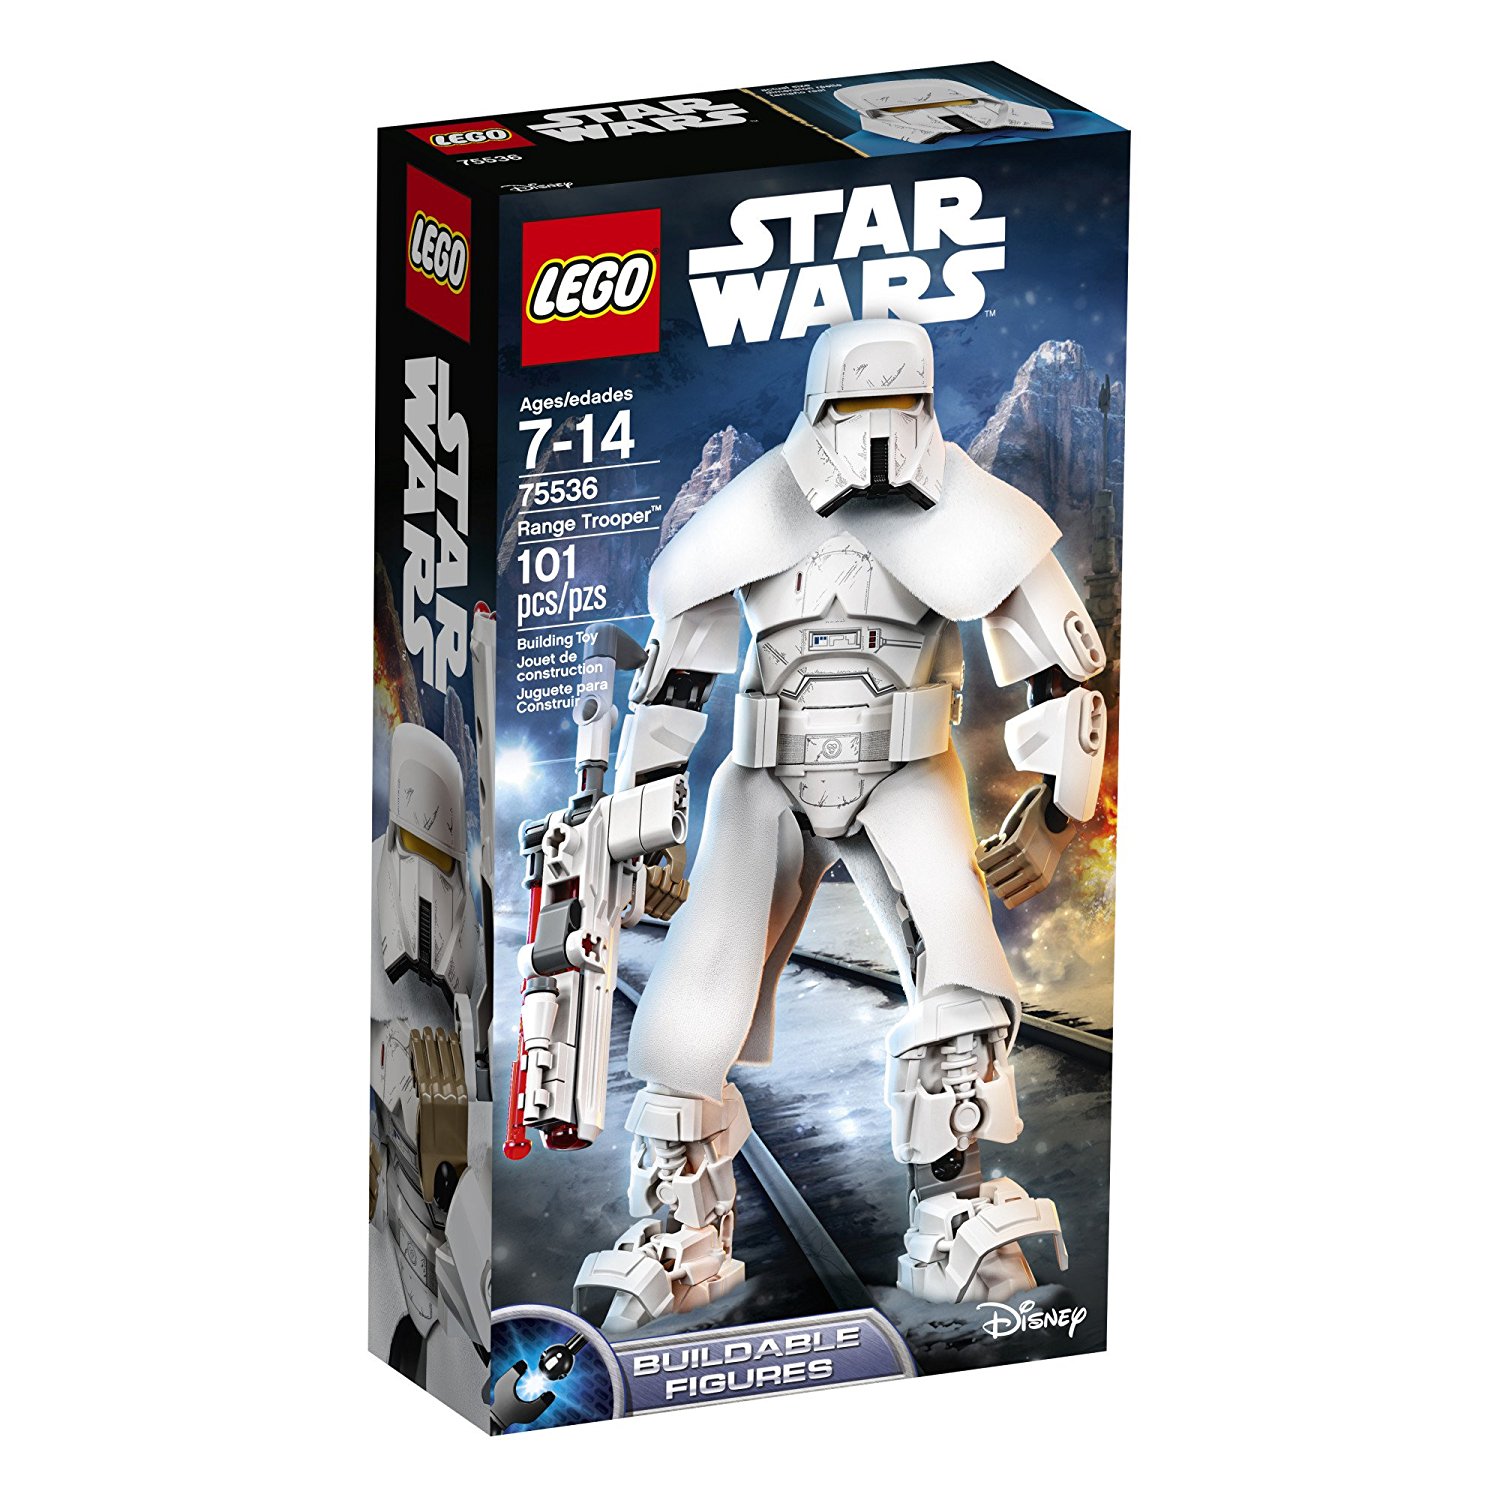 Solo: ASWS Lego Imperial Range Trooper Buildable Figure 1